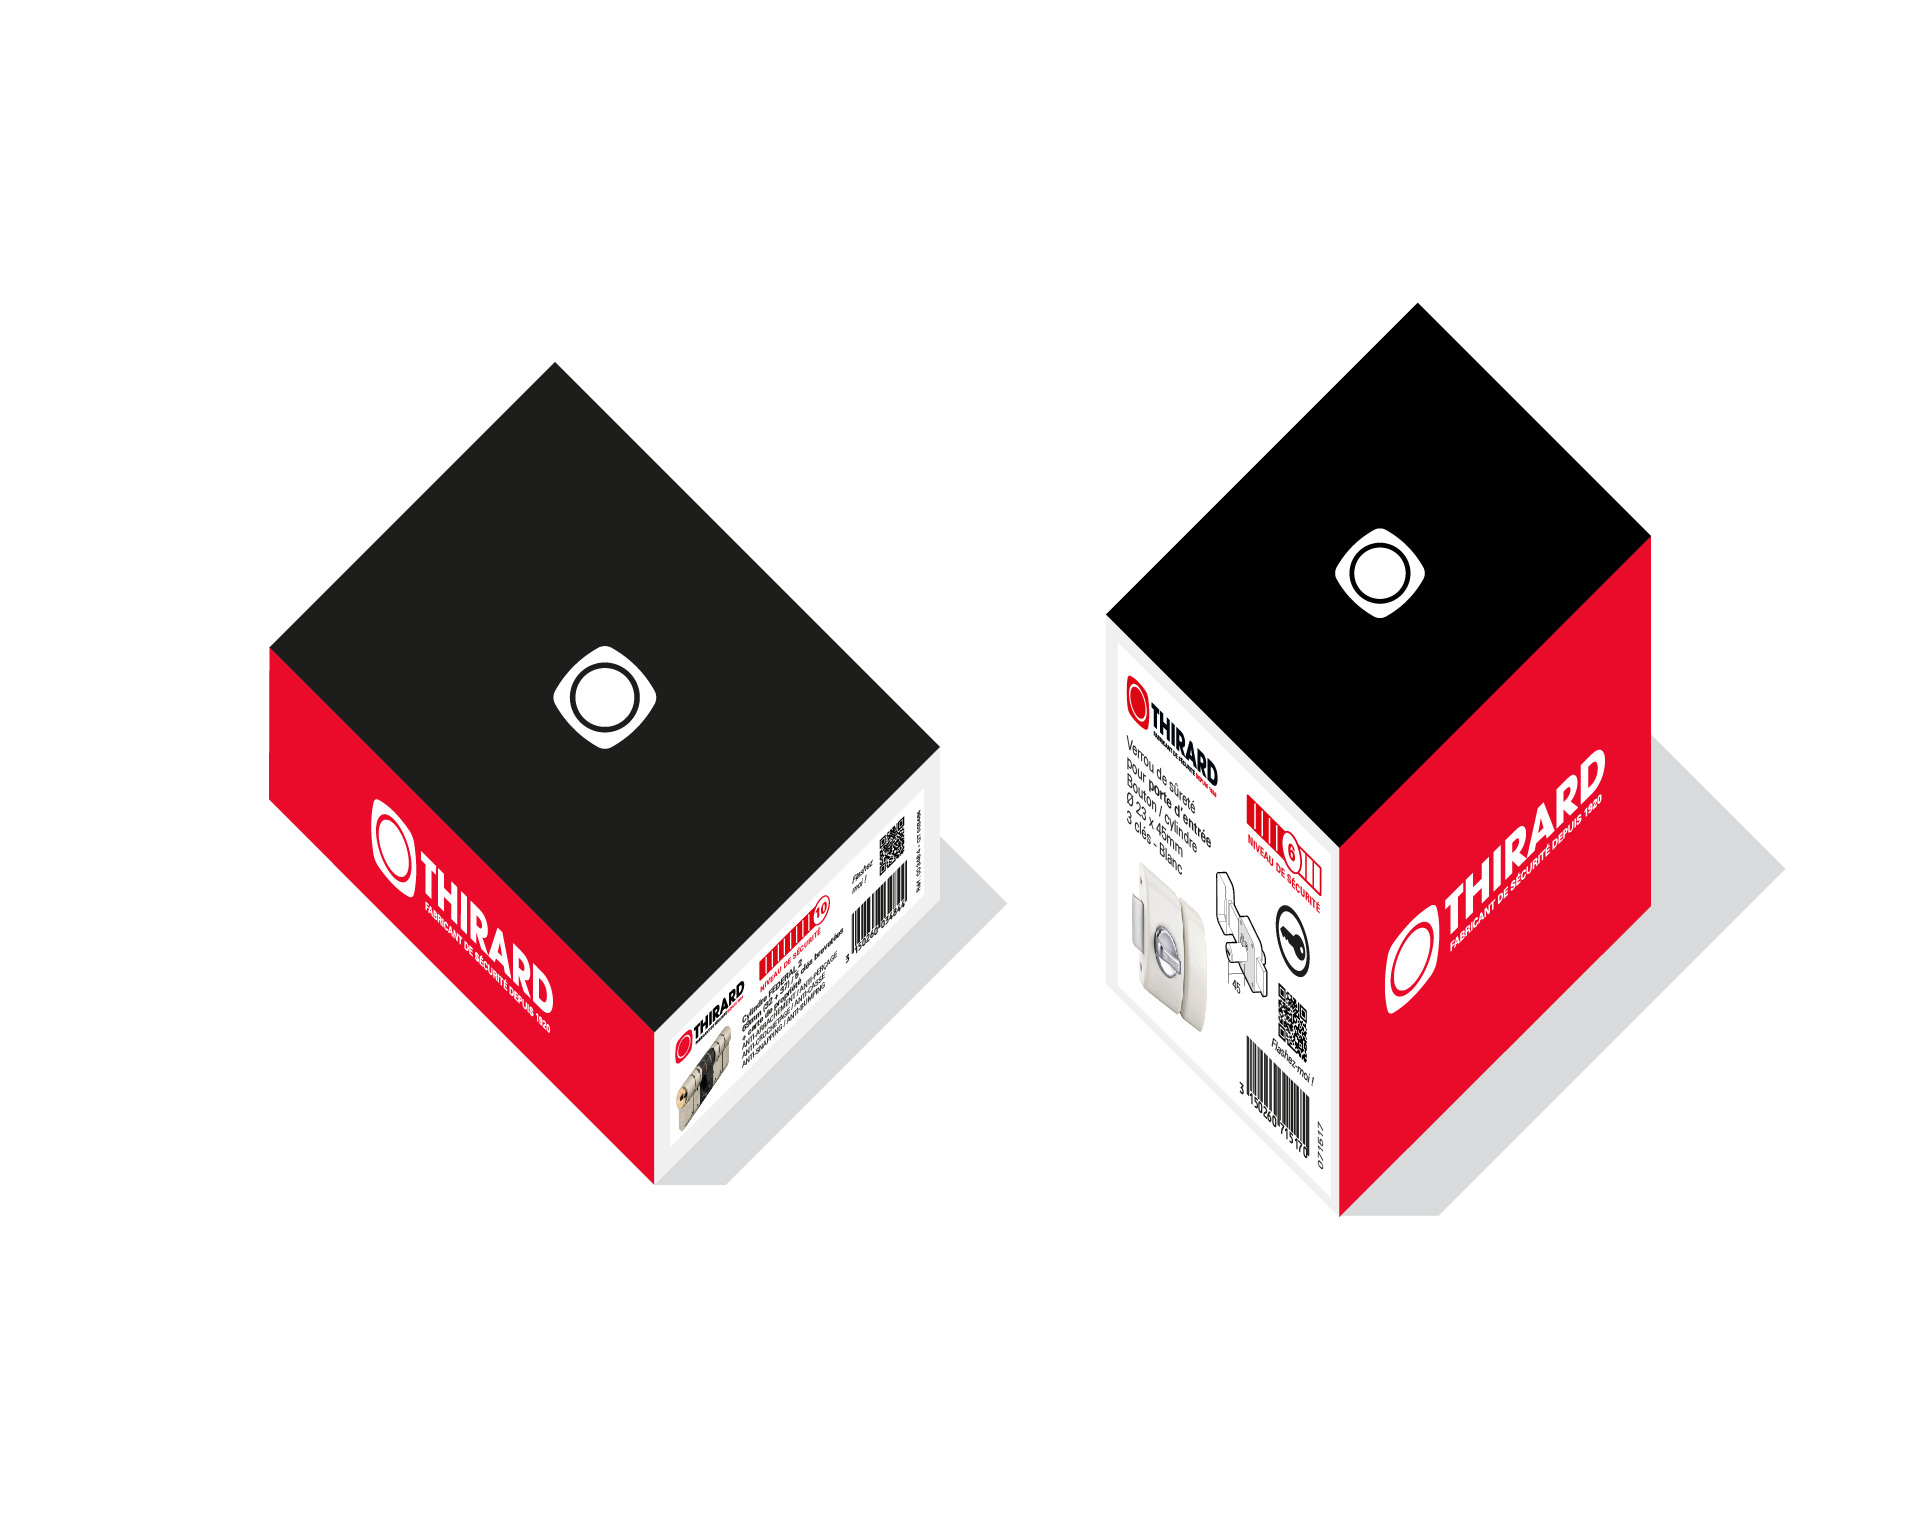 Thirard packaging composotion